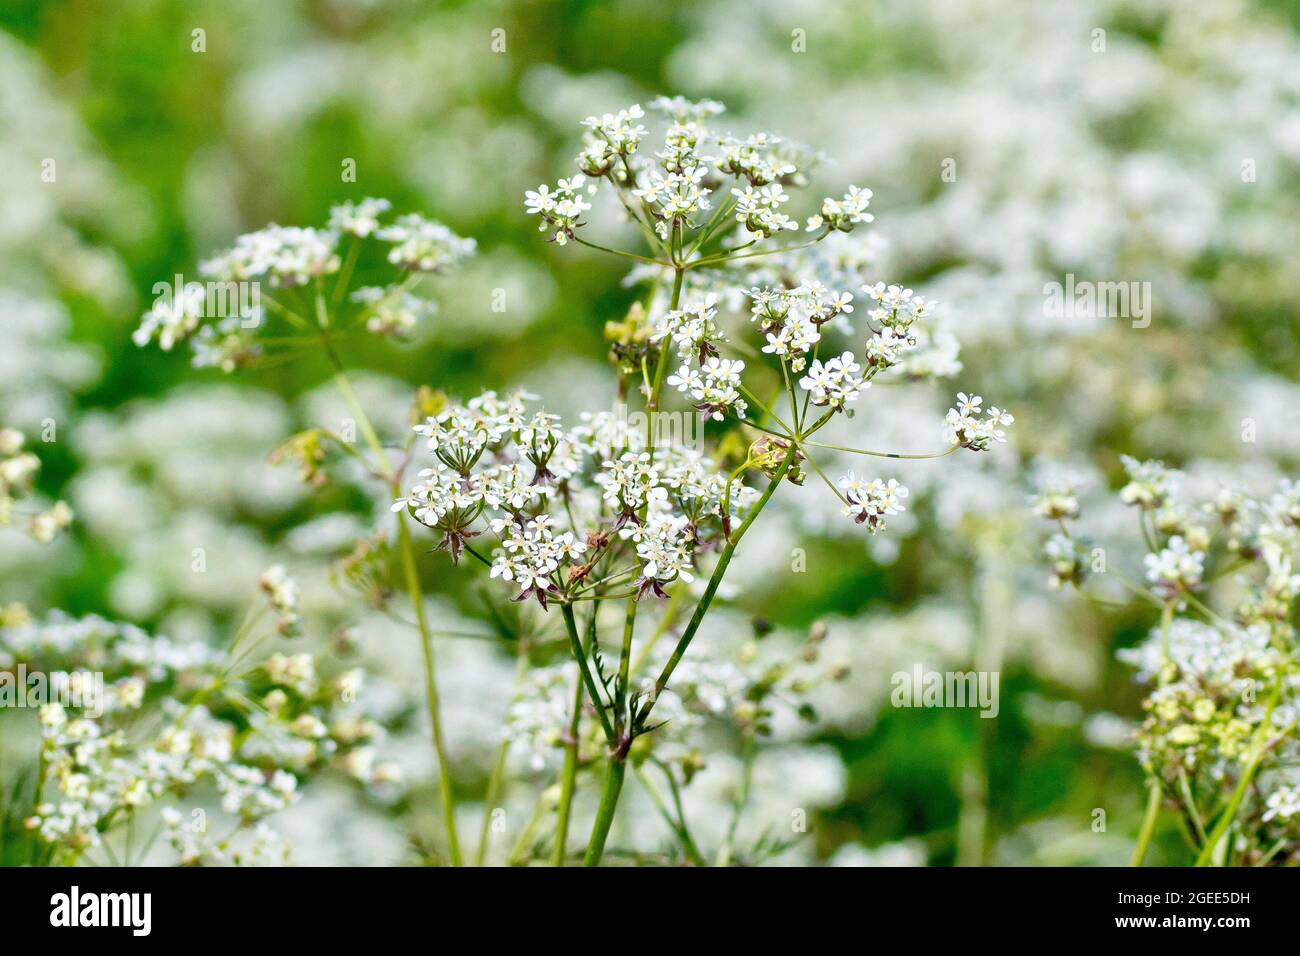 Cow Parsley (anthriscus sylvestris), close up showing the uppermost flowerheads of the common roadside plant. Stock Photo